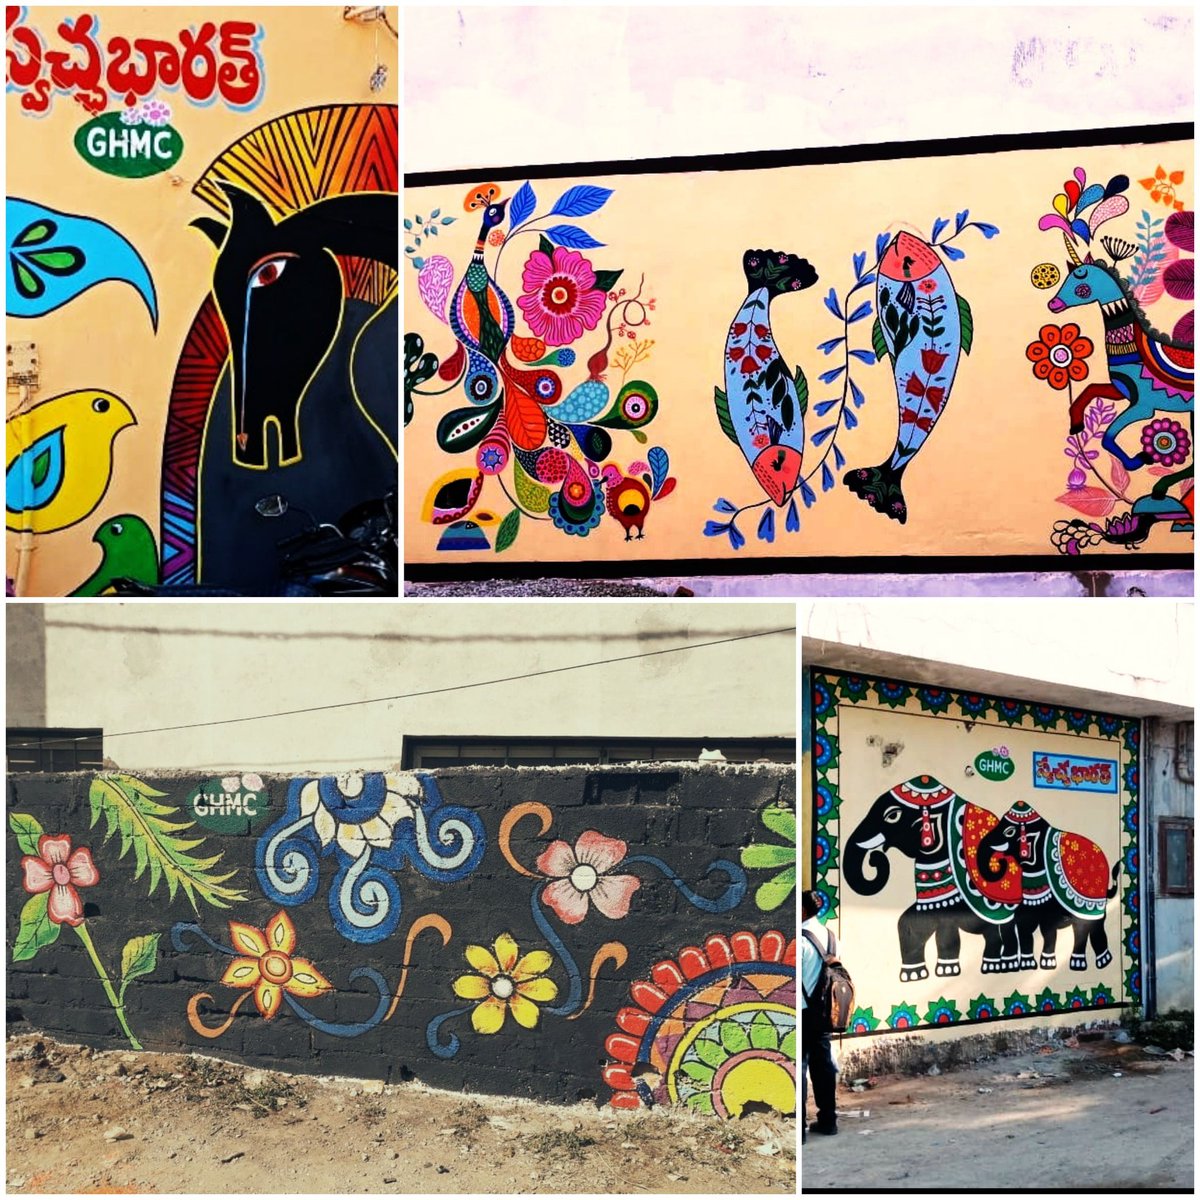 As a part of #SwachhSurvekshan2019 @GHMCOnline undertakes massive slum beautification drive under #CSR. As a Swachhata good practice- a beautiful spot is kept clean and litterfree by residents too.#MyCleanIndia #CleanHyderabad.